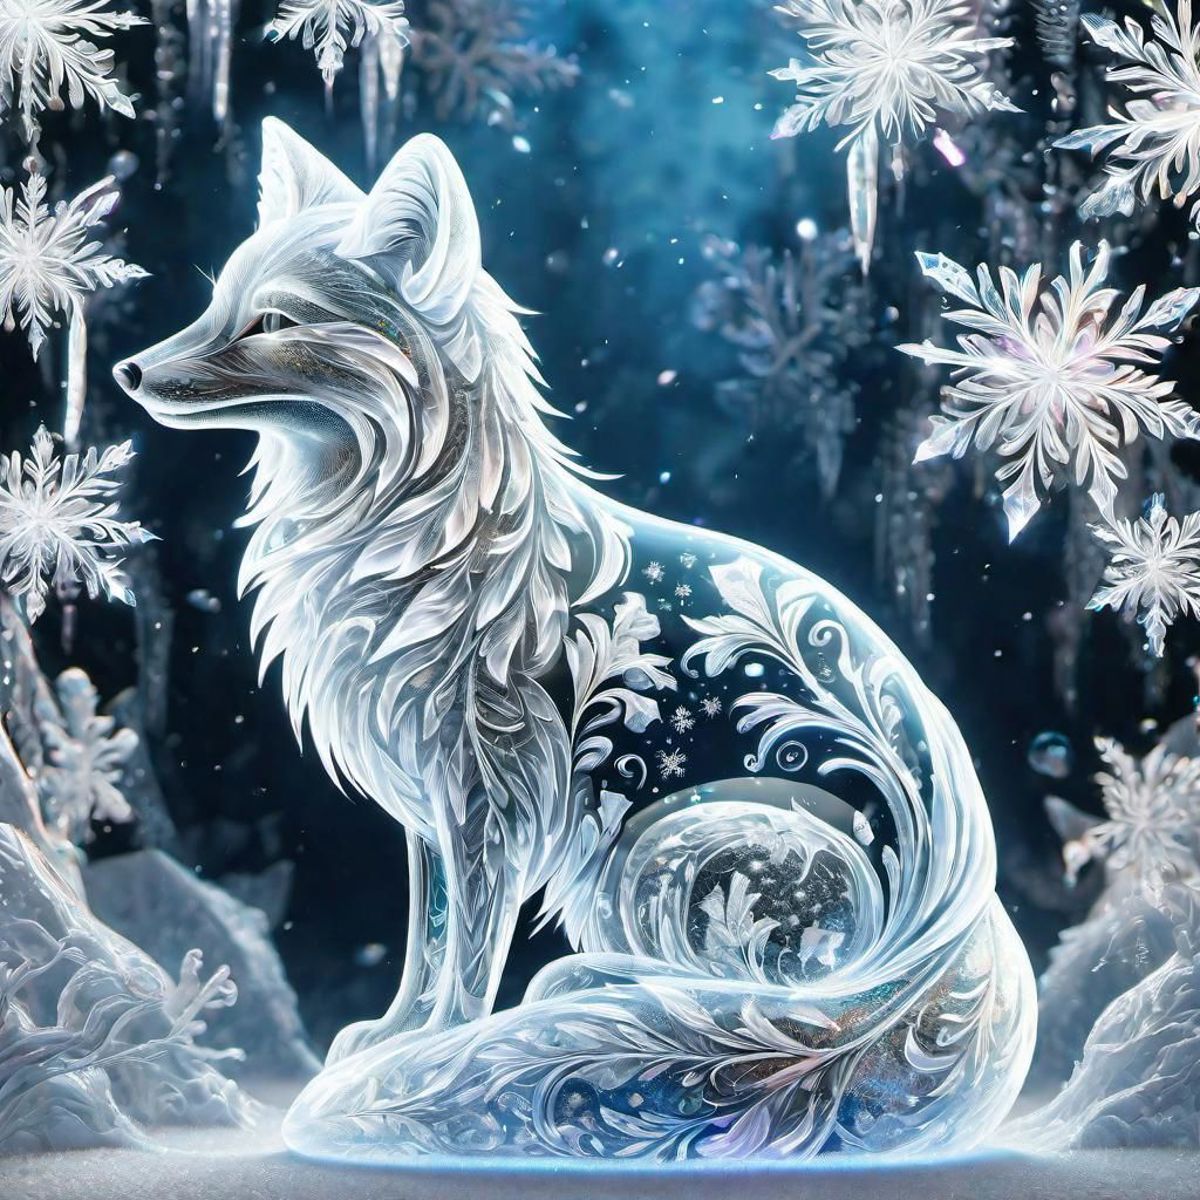 A frosty white fox is sitting in the snow, surrounded by many white snowflakes. The fox has a very pretty design on its fur, making it a beautiful and captivating sight.